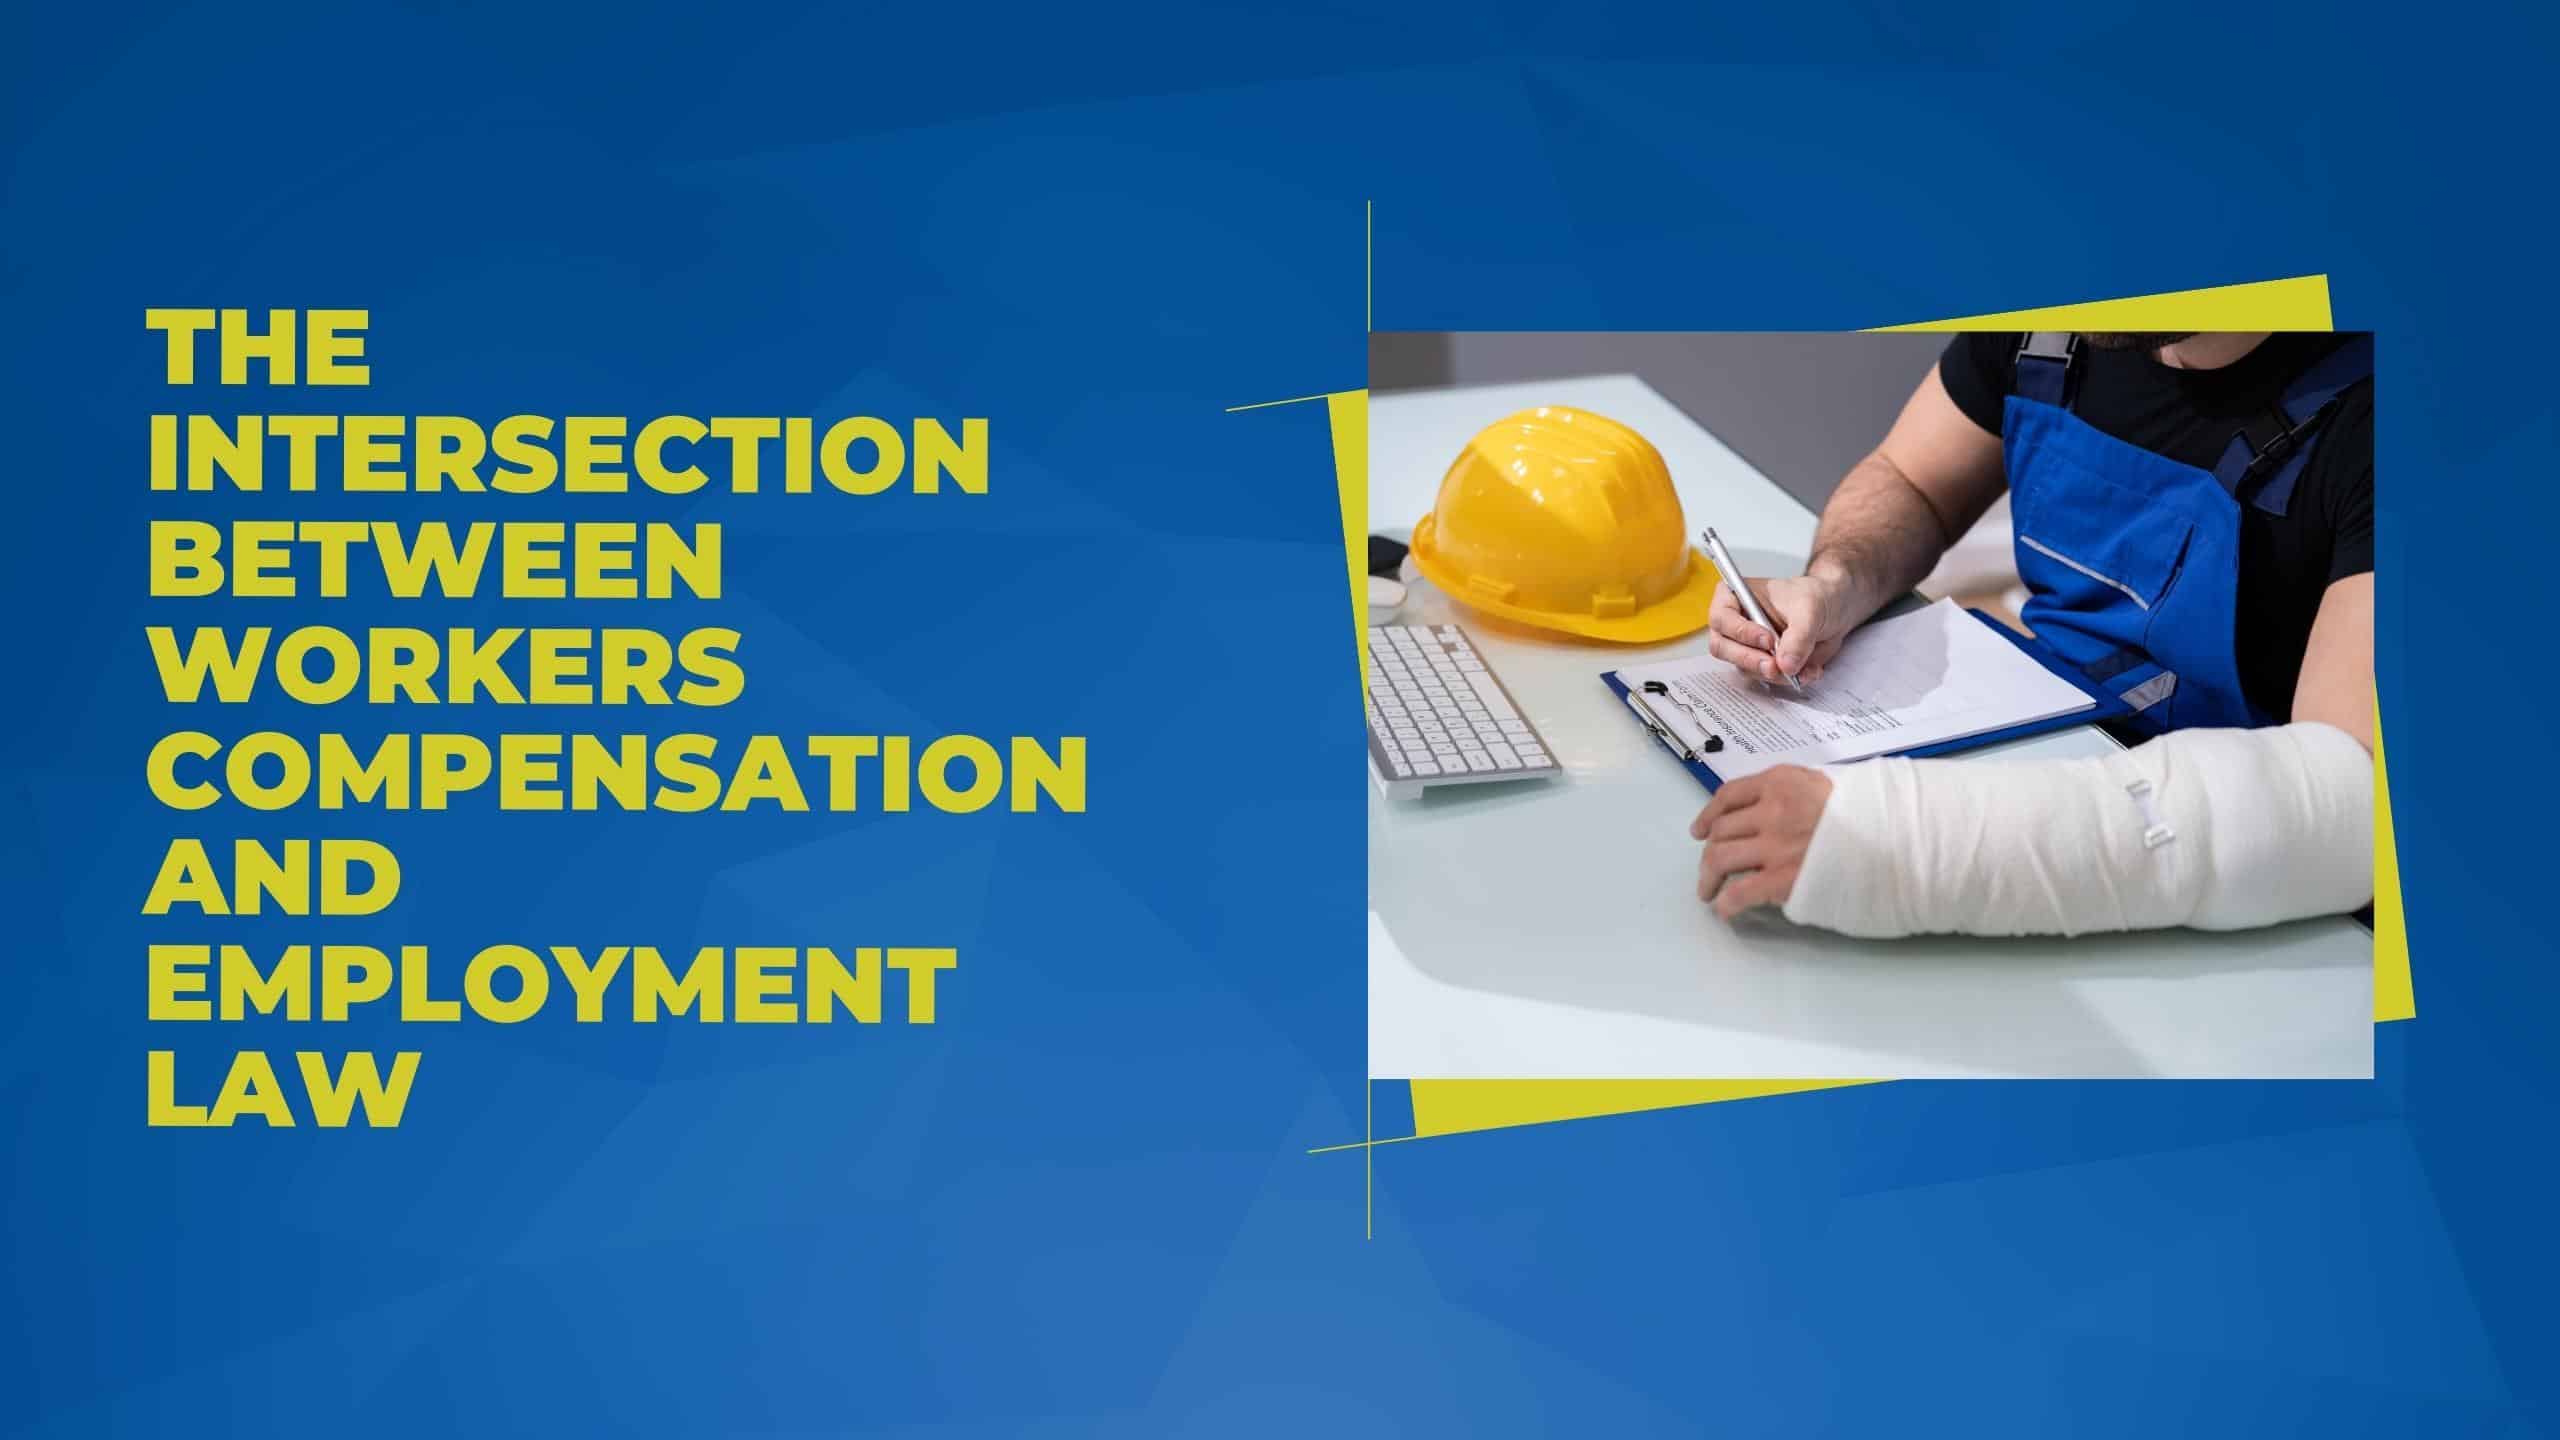 The Intersection Between Workers Compensation and Employment Law